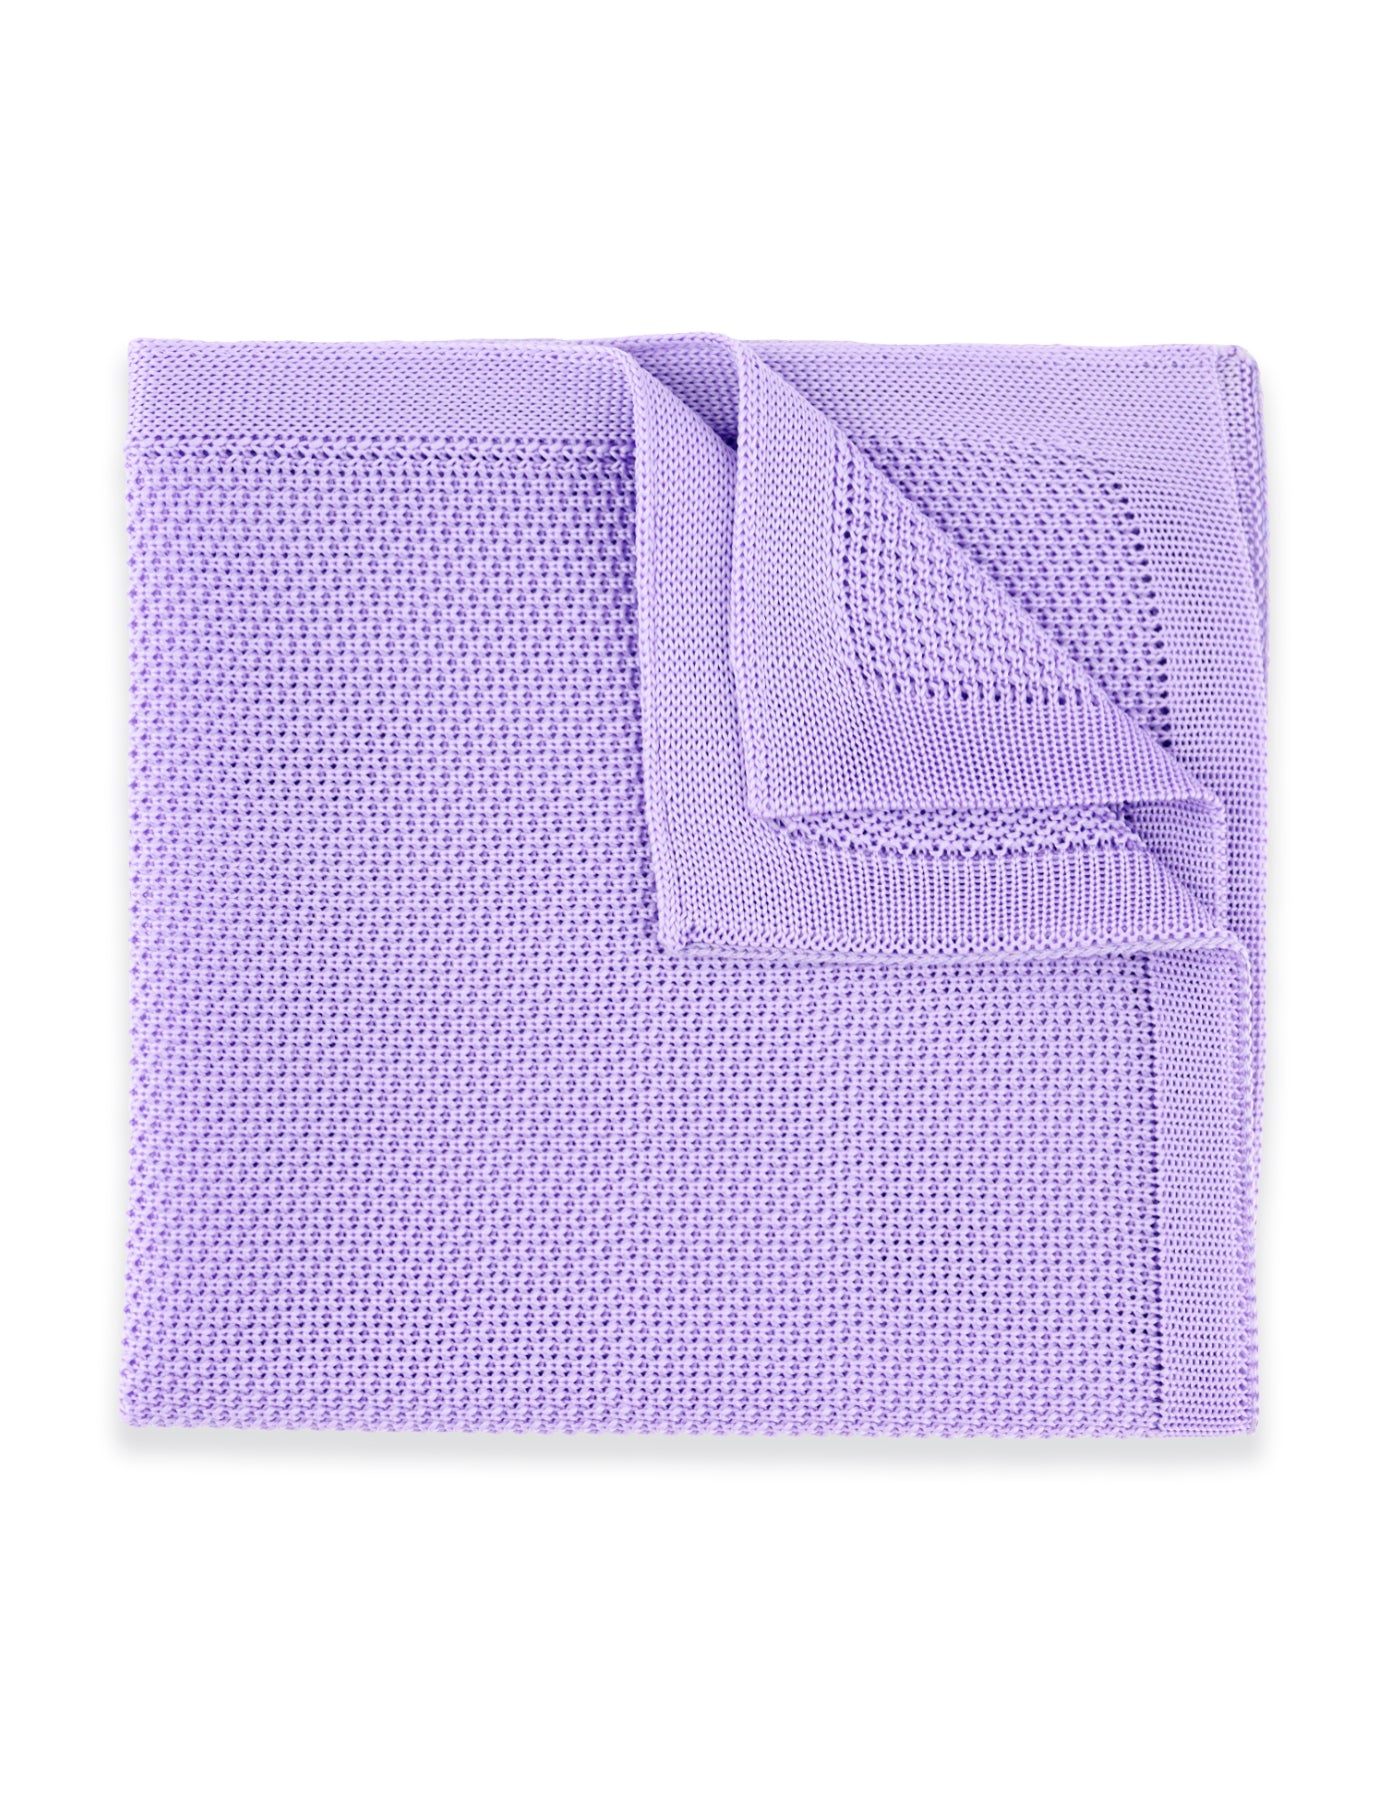 100% Polyester Diamond End Knitted Tie - Lavender Purple